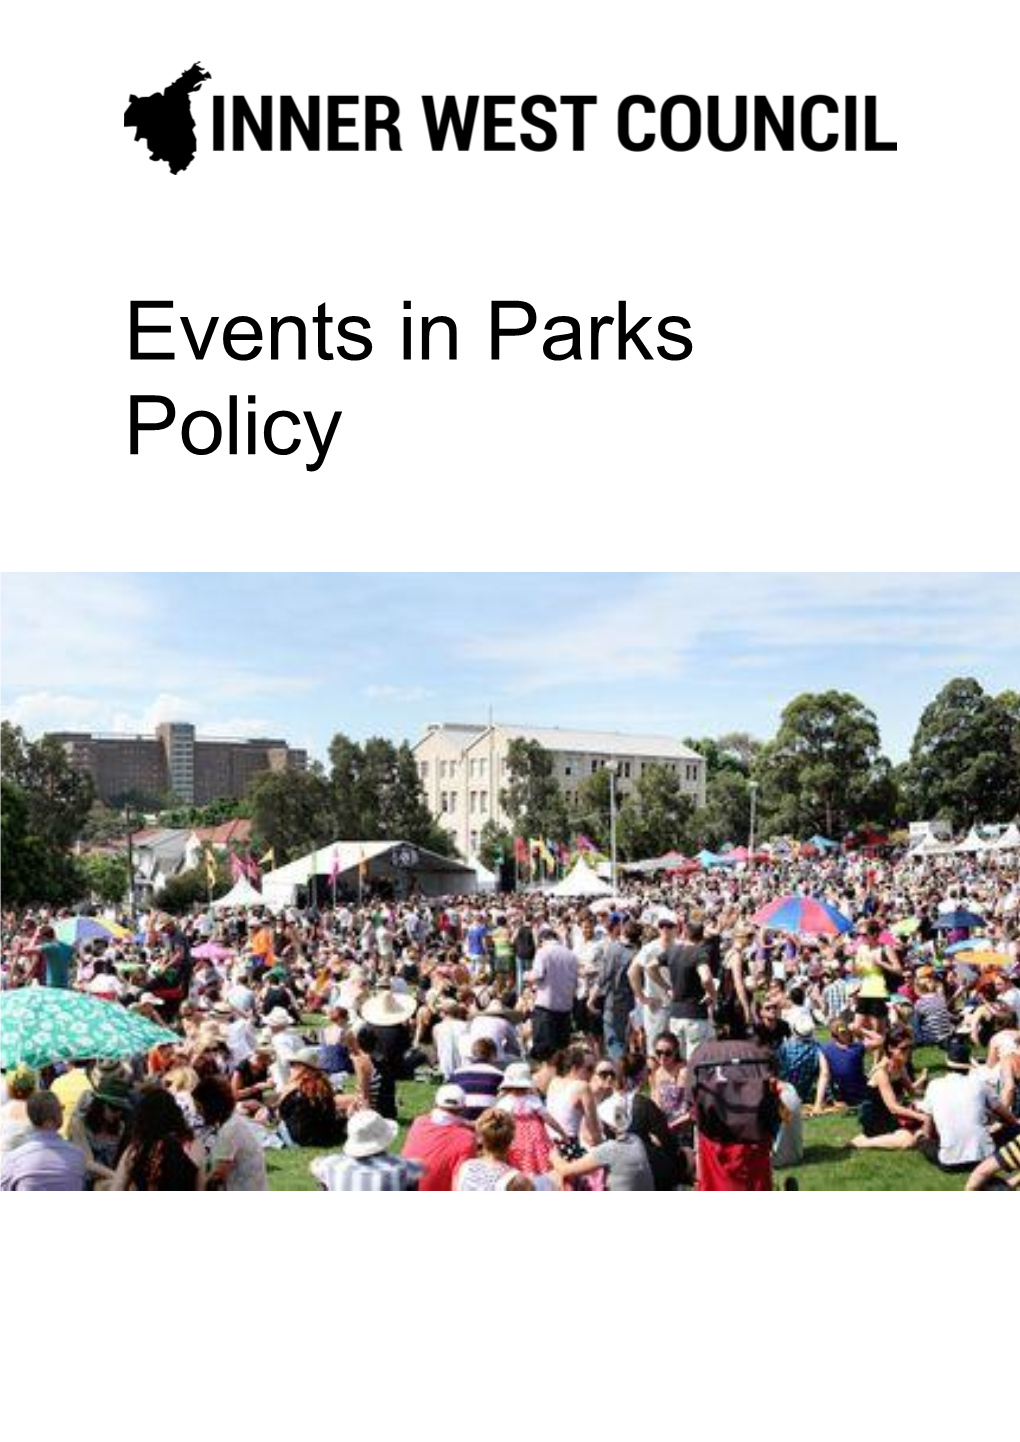 Events in Parks Policy